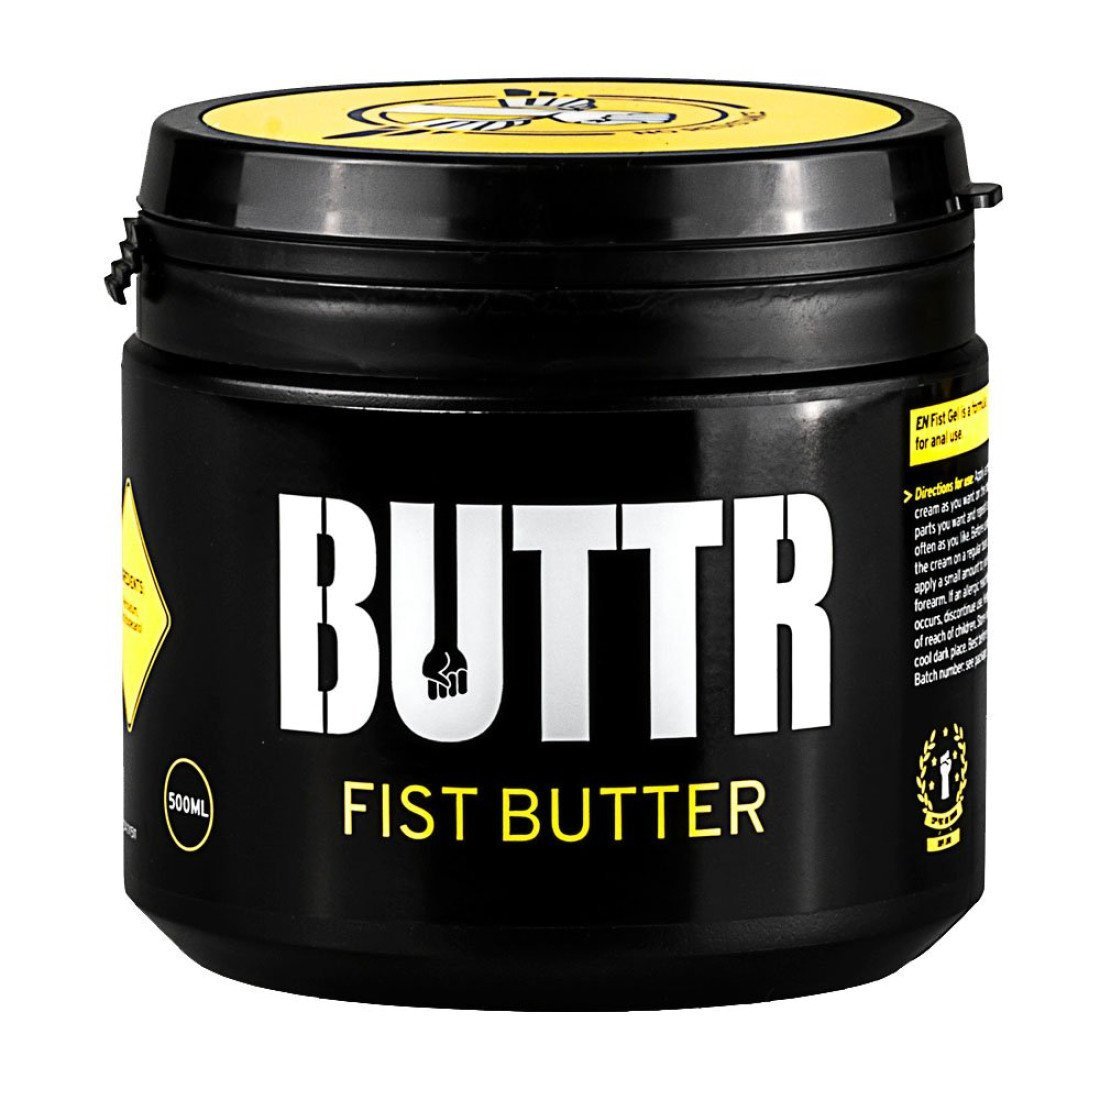 Analinis lubrikantas „Fisting Butter“, 500 ml - Buttr